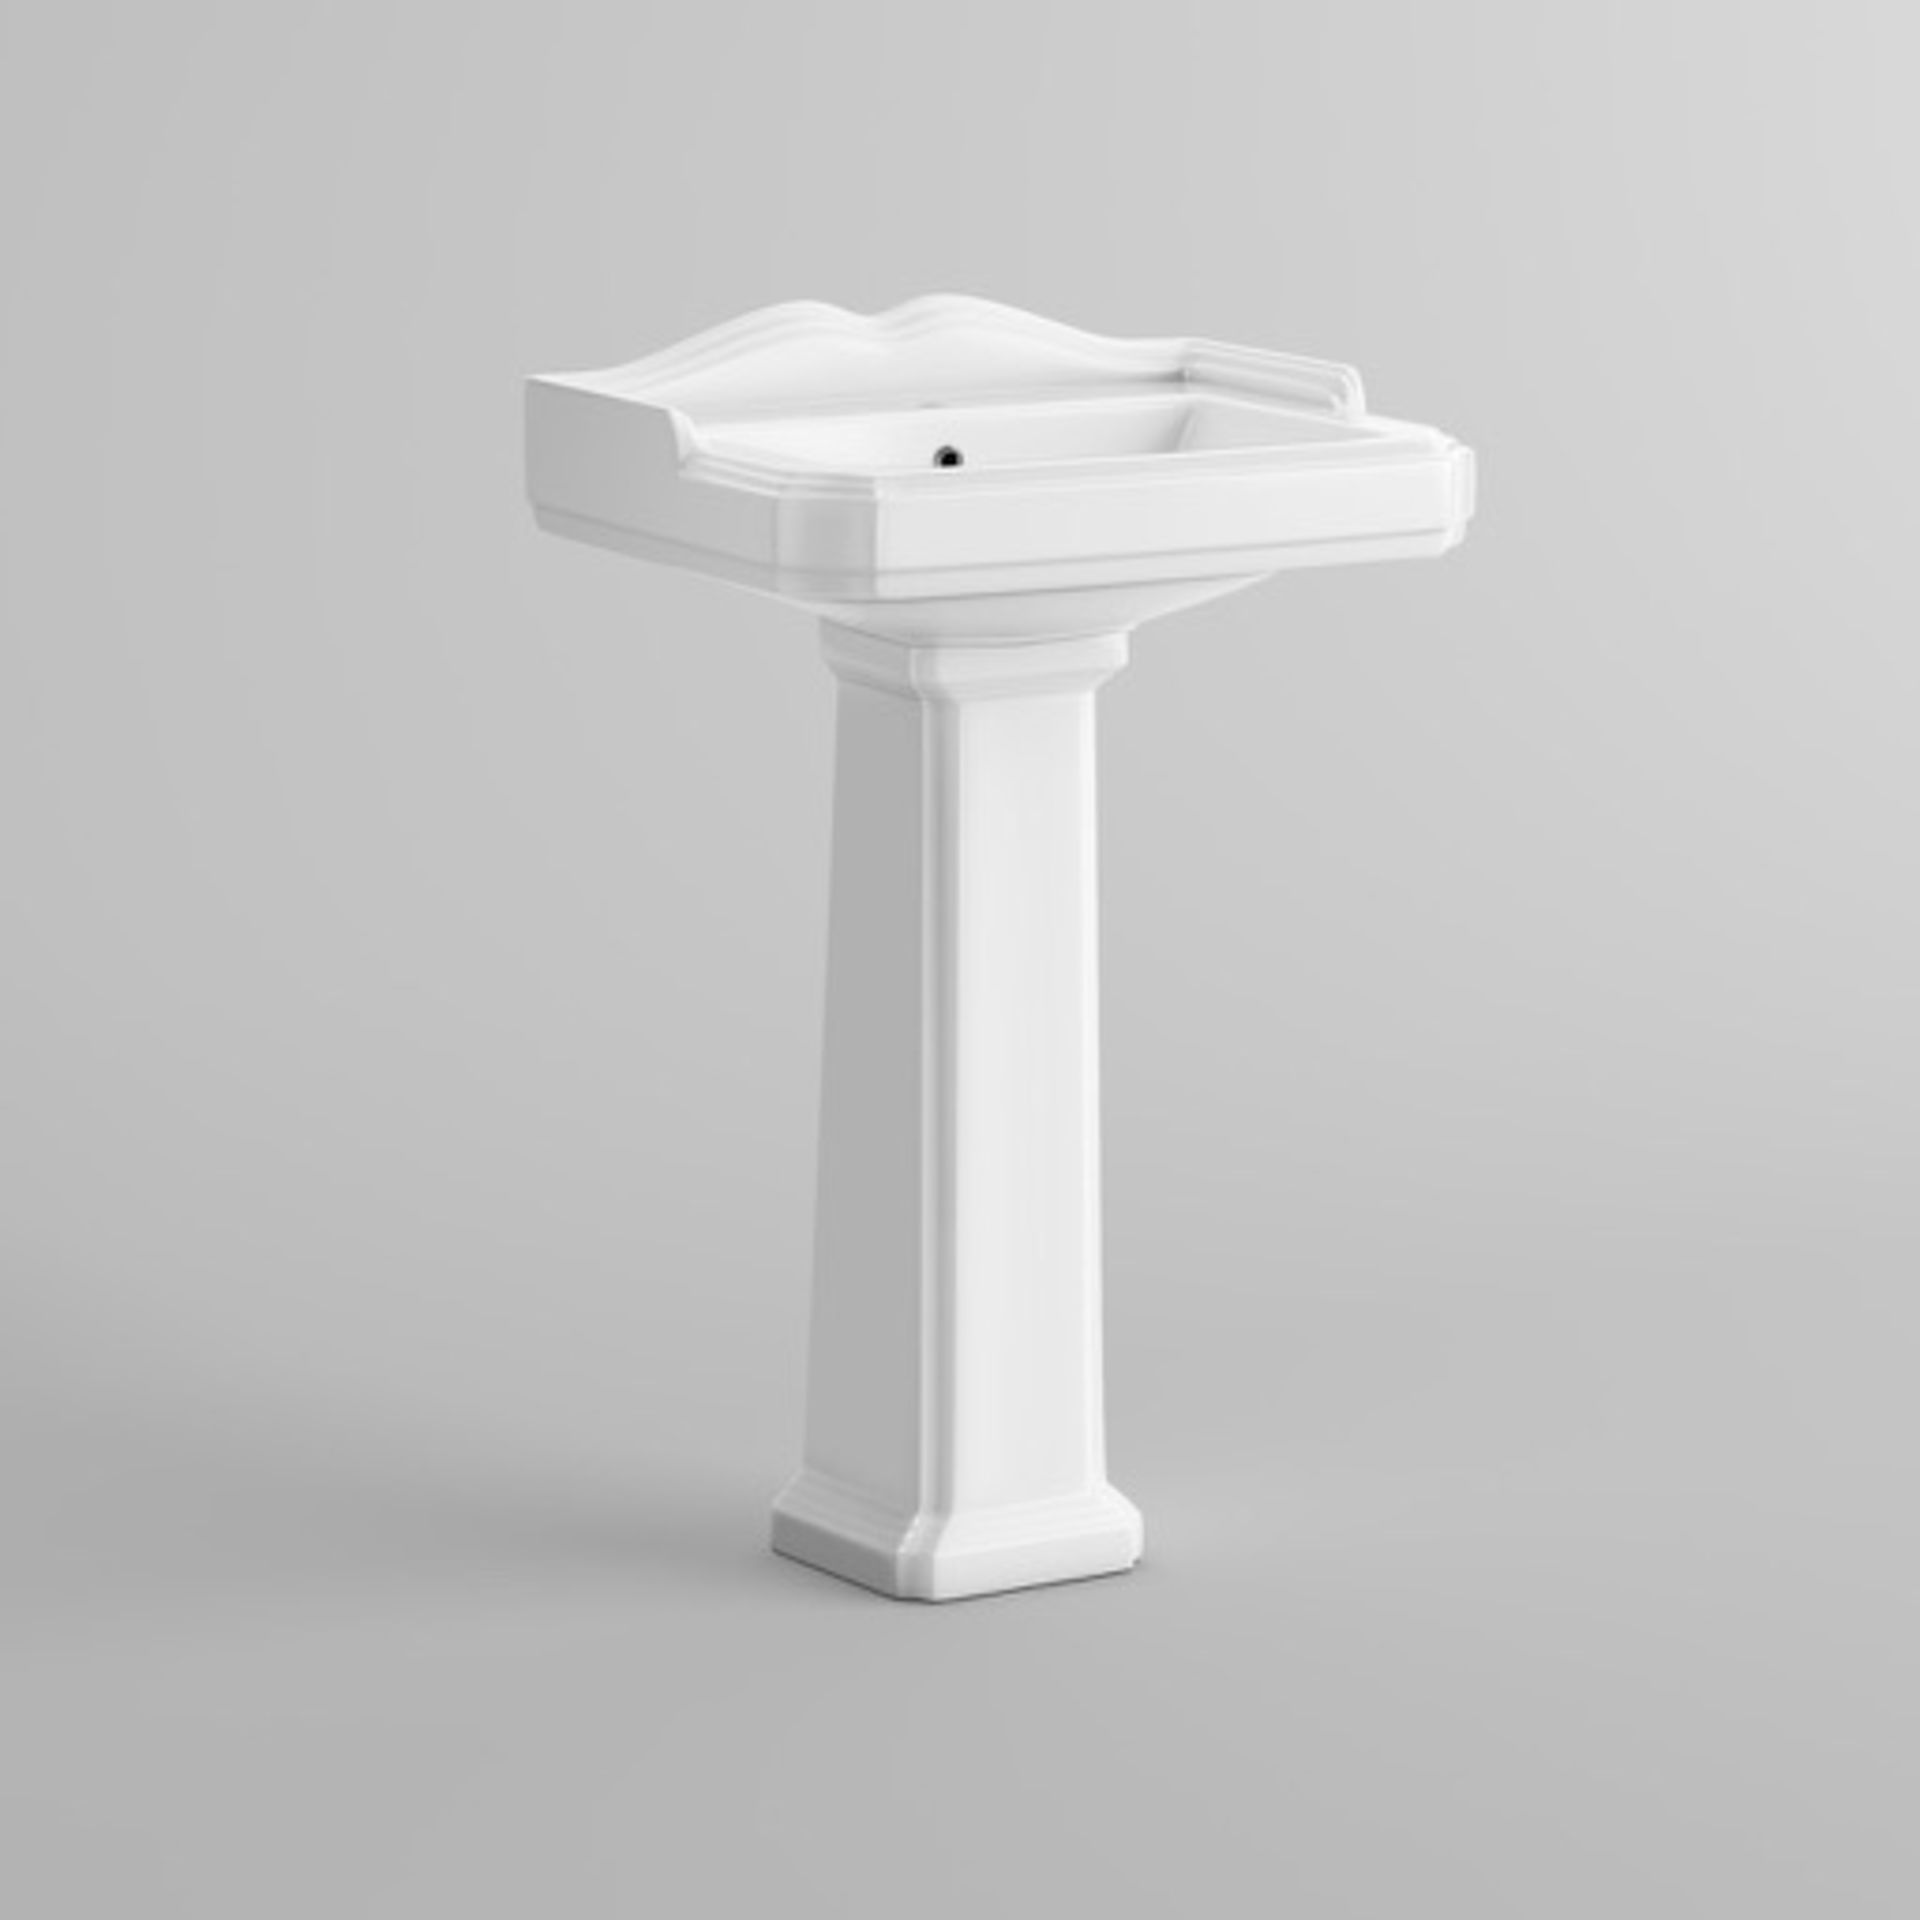 PALLET TO CONTAIN 8 x Victoria Basin & Pedestal - Single Tap Hole. RRP £175.99, TOTAL RRP £1,407.92. - Image 3 of 4